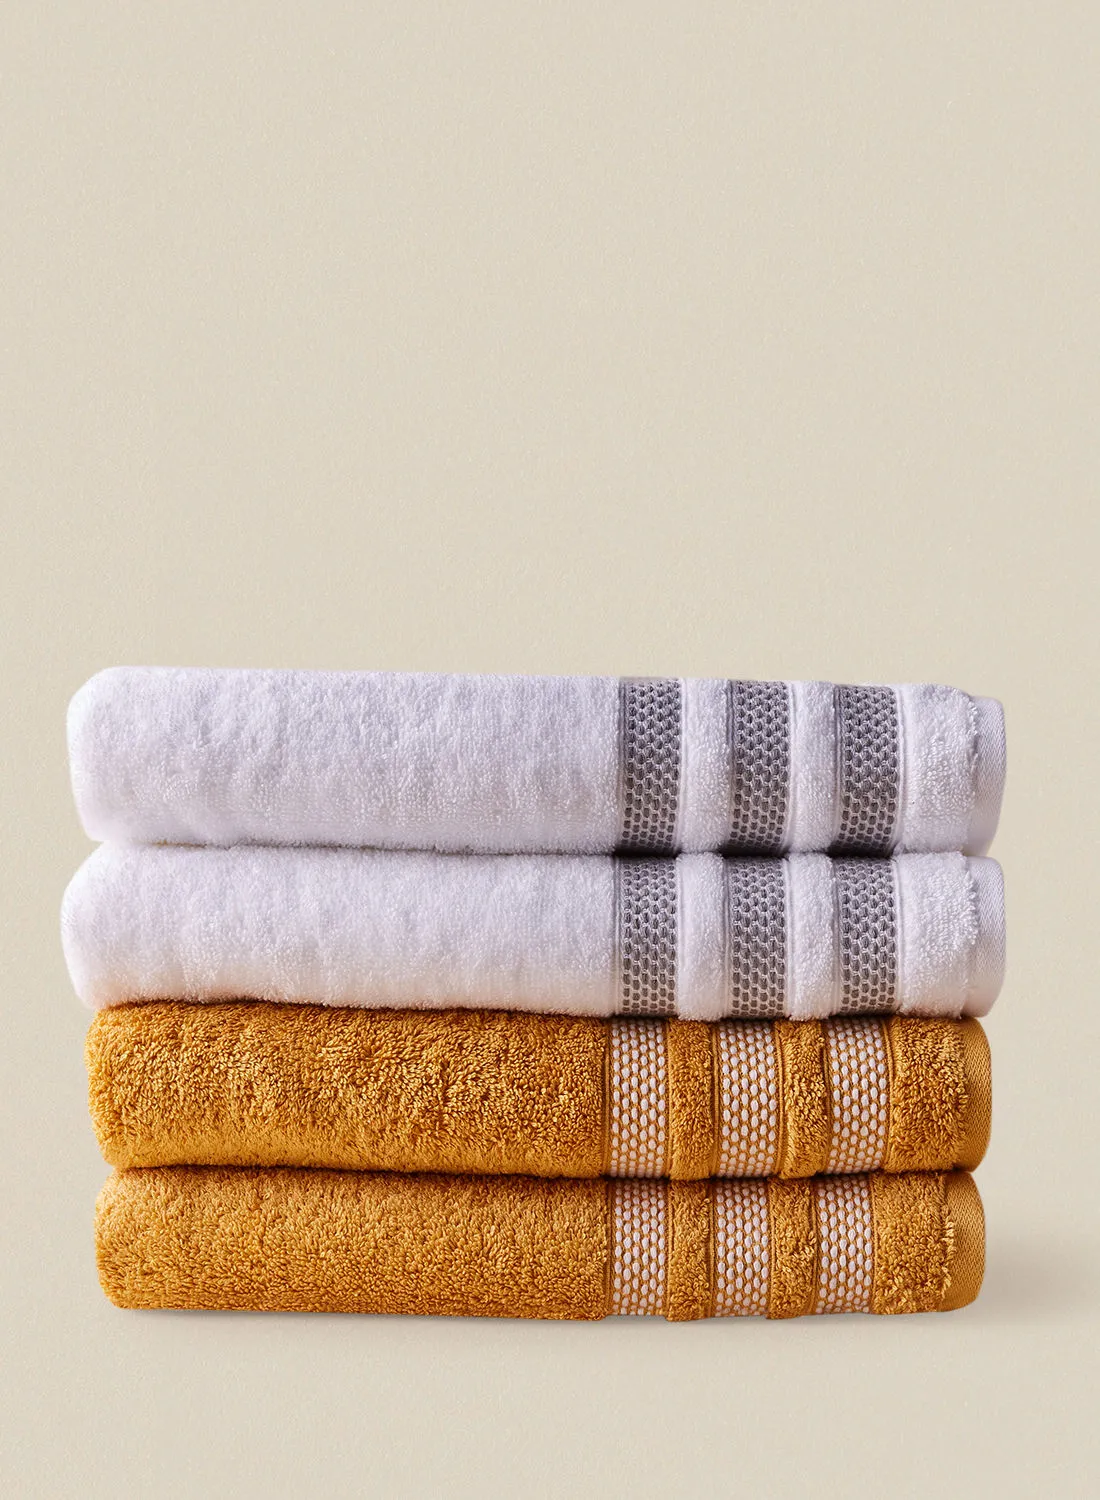 noon east 4 Piece Bathroom Towel Set - 500 GSM 100% Cotton Low Twist - 4 Bath Towel - Multicolor White/Gold Color - Highly Absorbent - Fast Dry